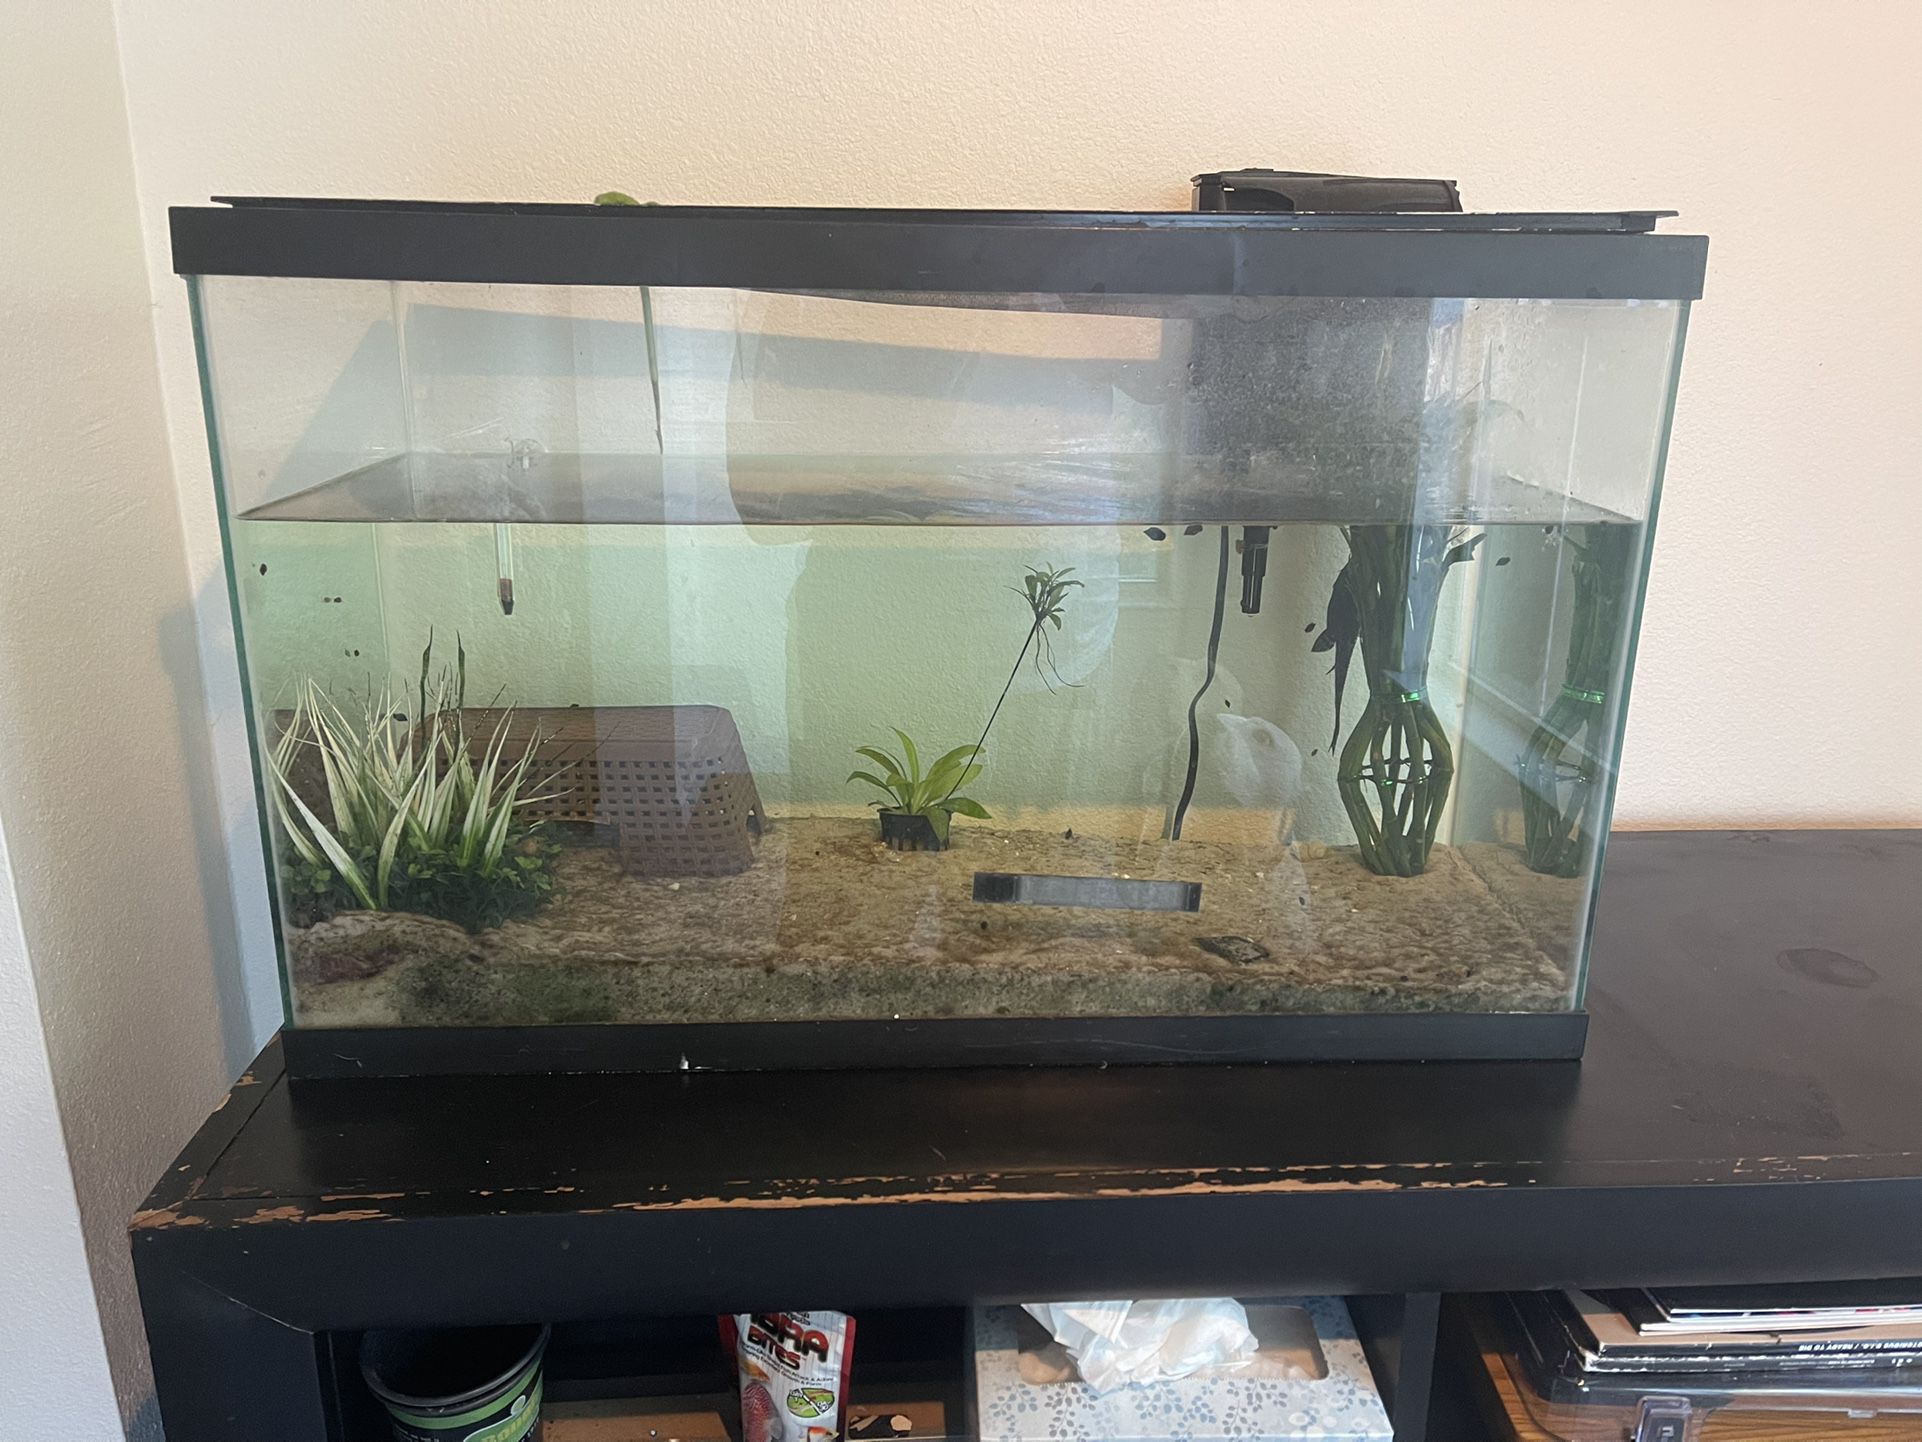 30 Gallon Fish Tank With Natural Sand Plants Fish And Filter